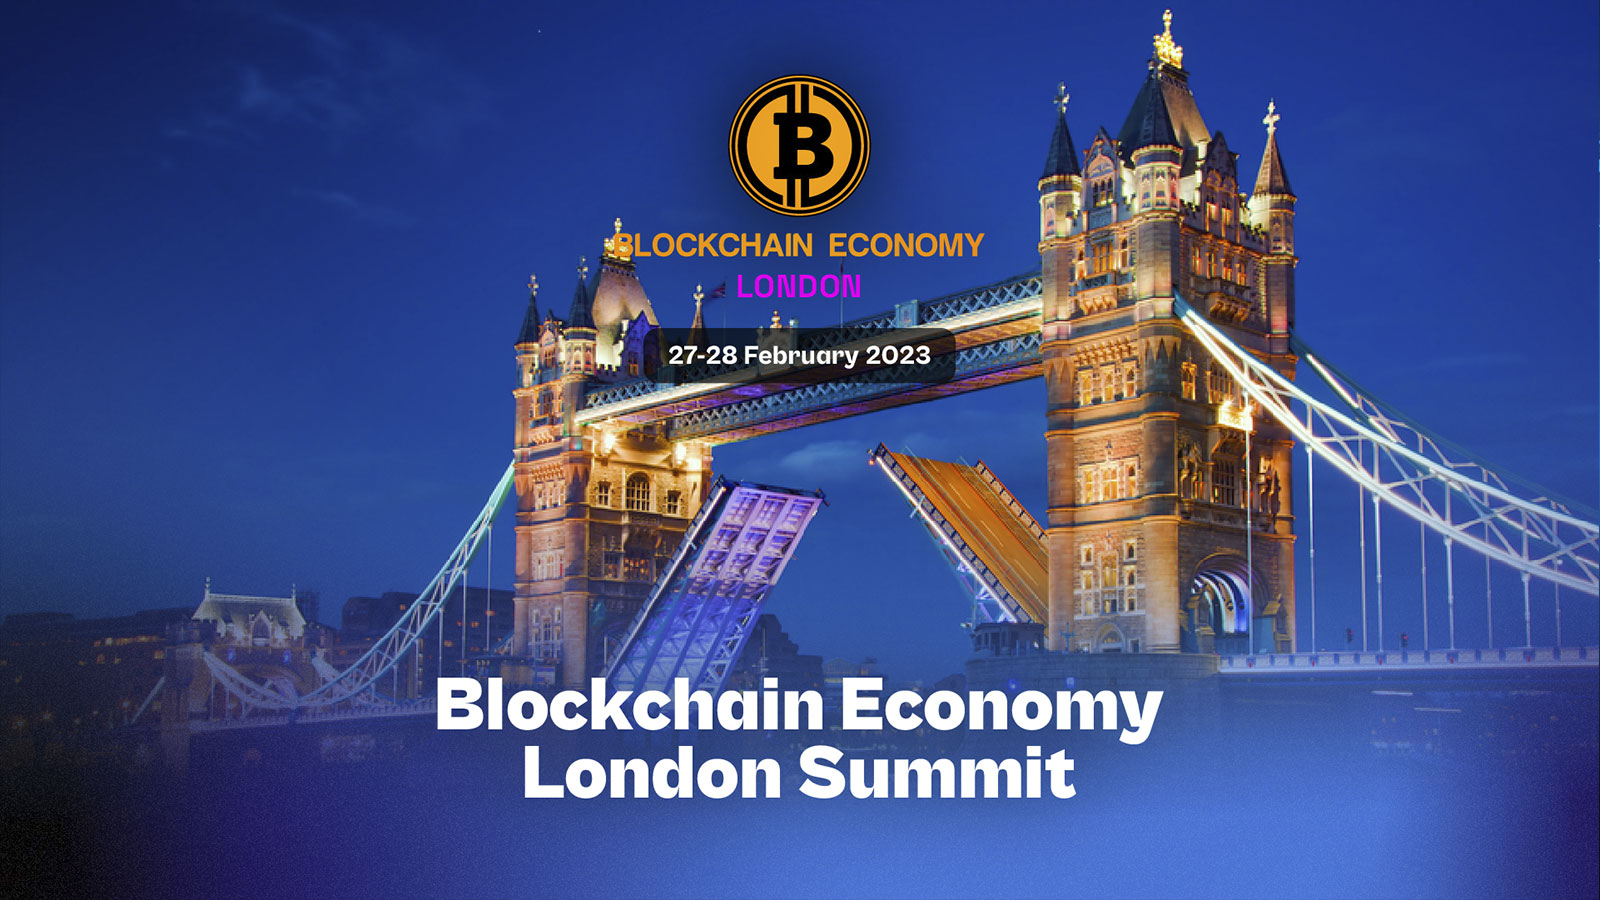 London Is Going to Host the Largest Crypto & Blockchain Conference